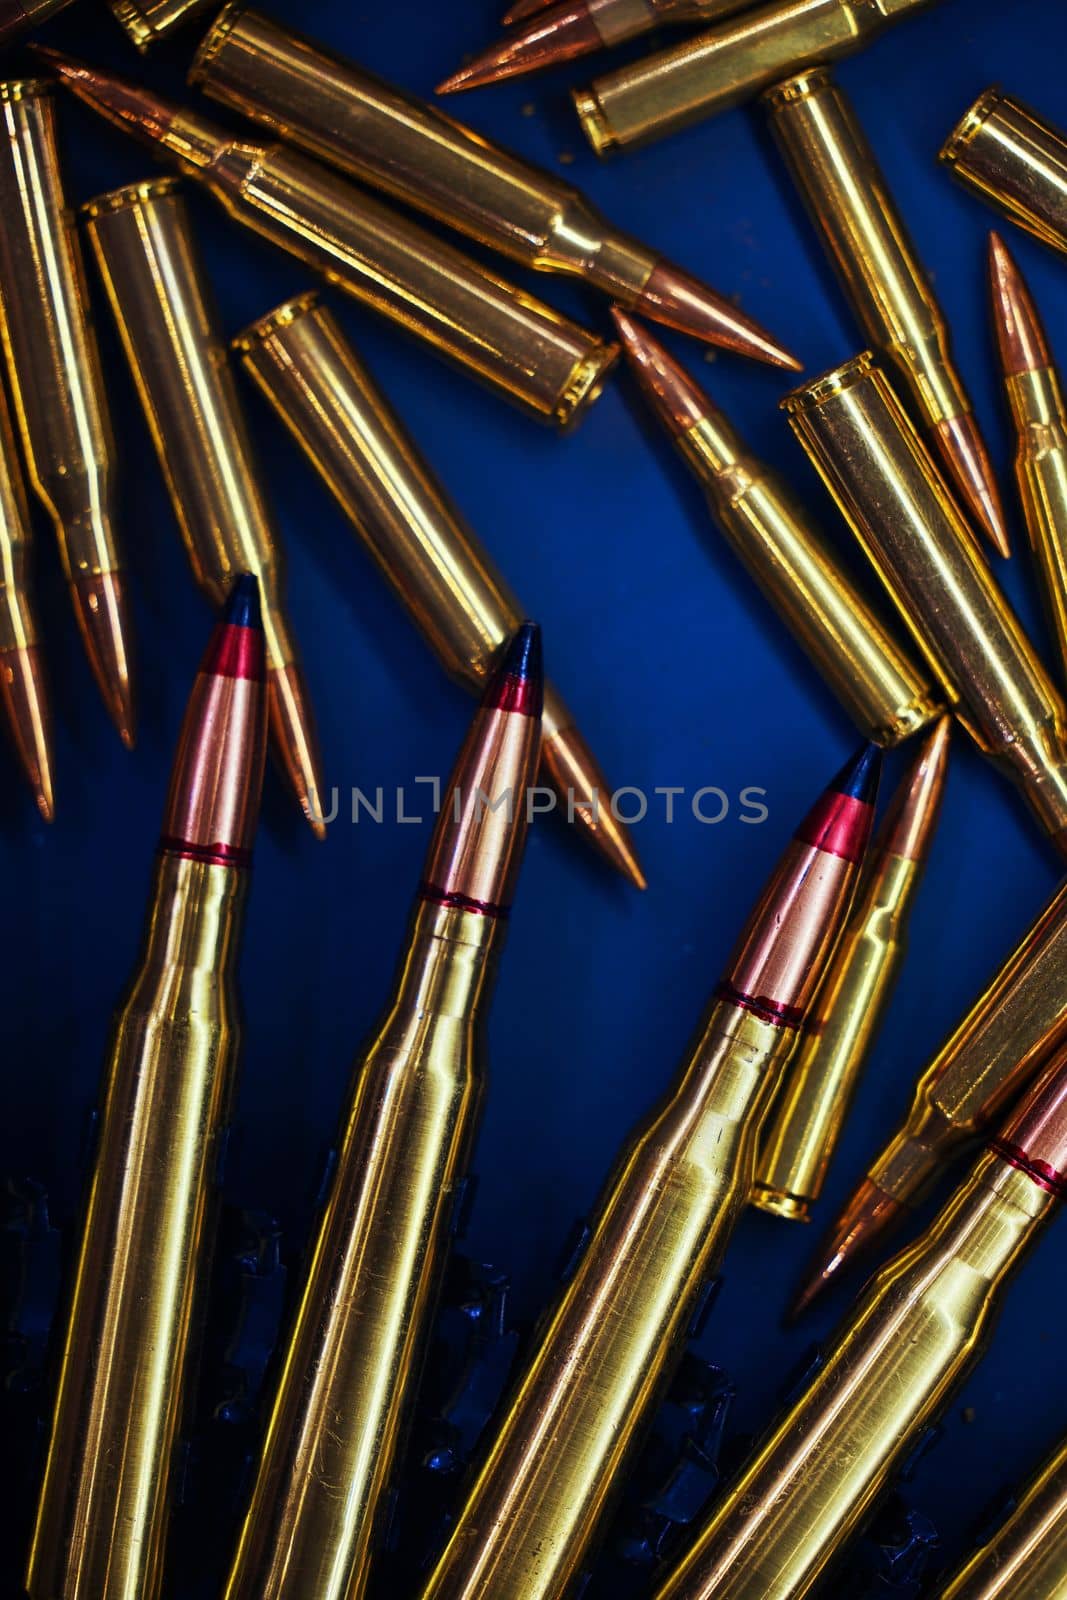 Ammunition for the machine gun and rifle are scattered on the table. Ammonution on dark blue table. Ammo pile, war ammo background by EvgeniyQW